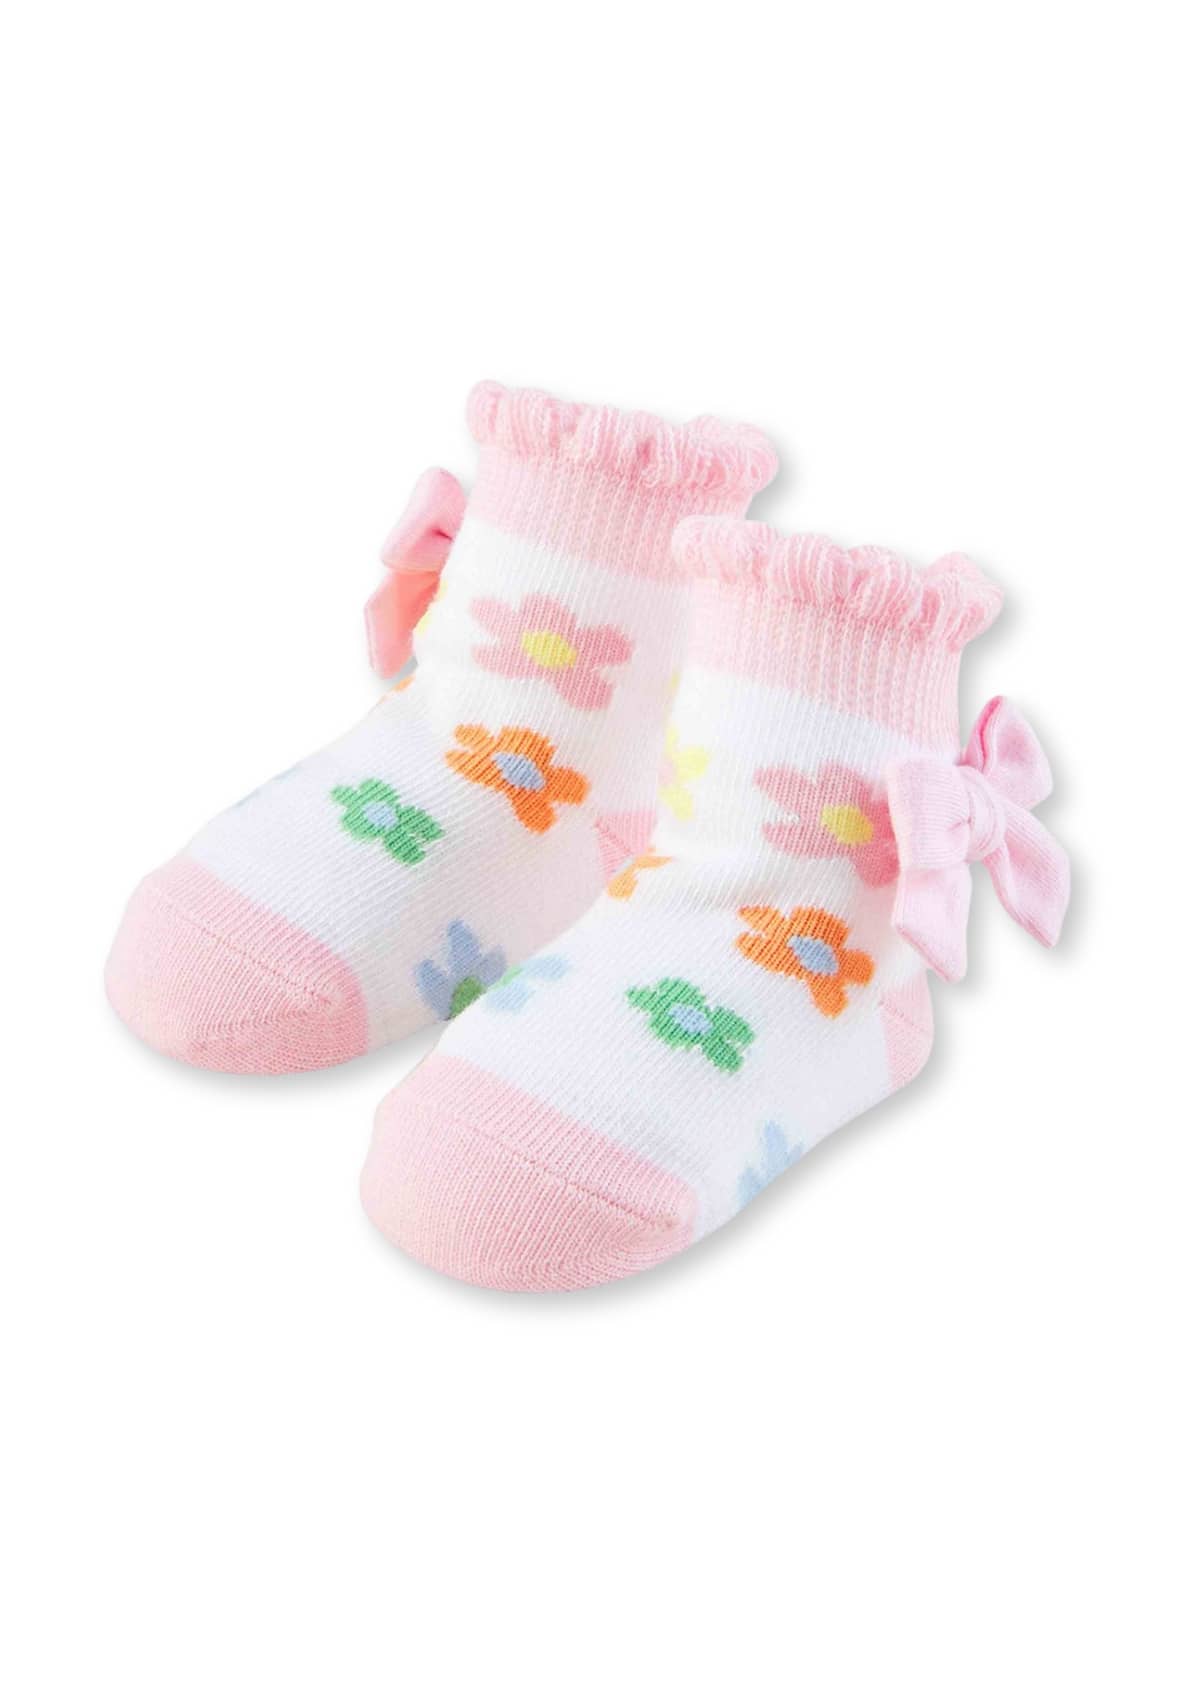 Accessories For the Littles-New Accessories For the Littles-Socks For the Littles-Ruby Jane.